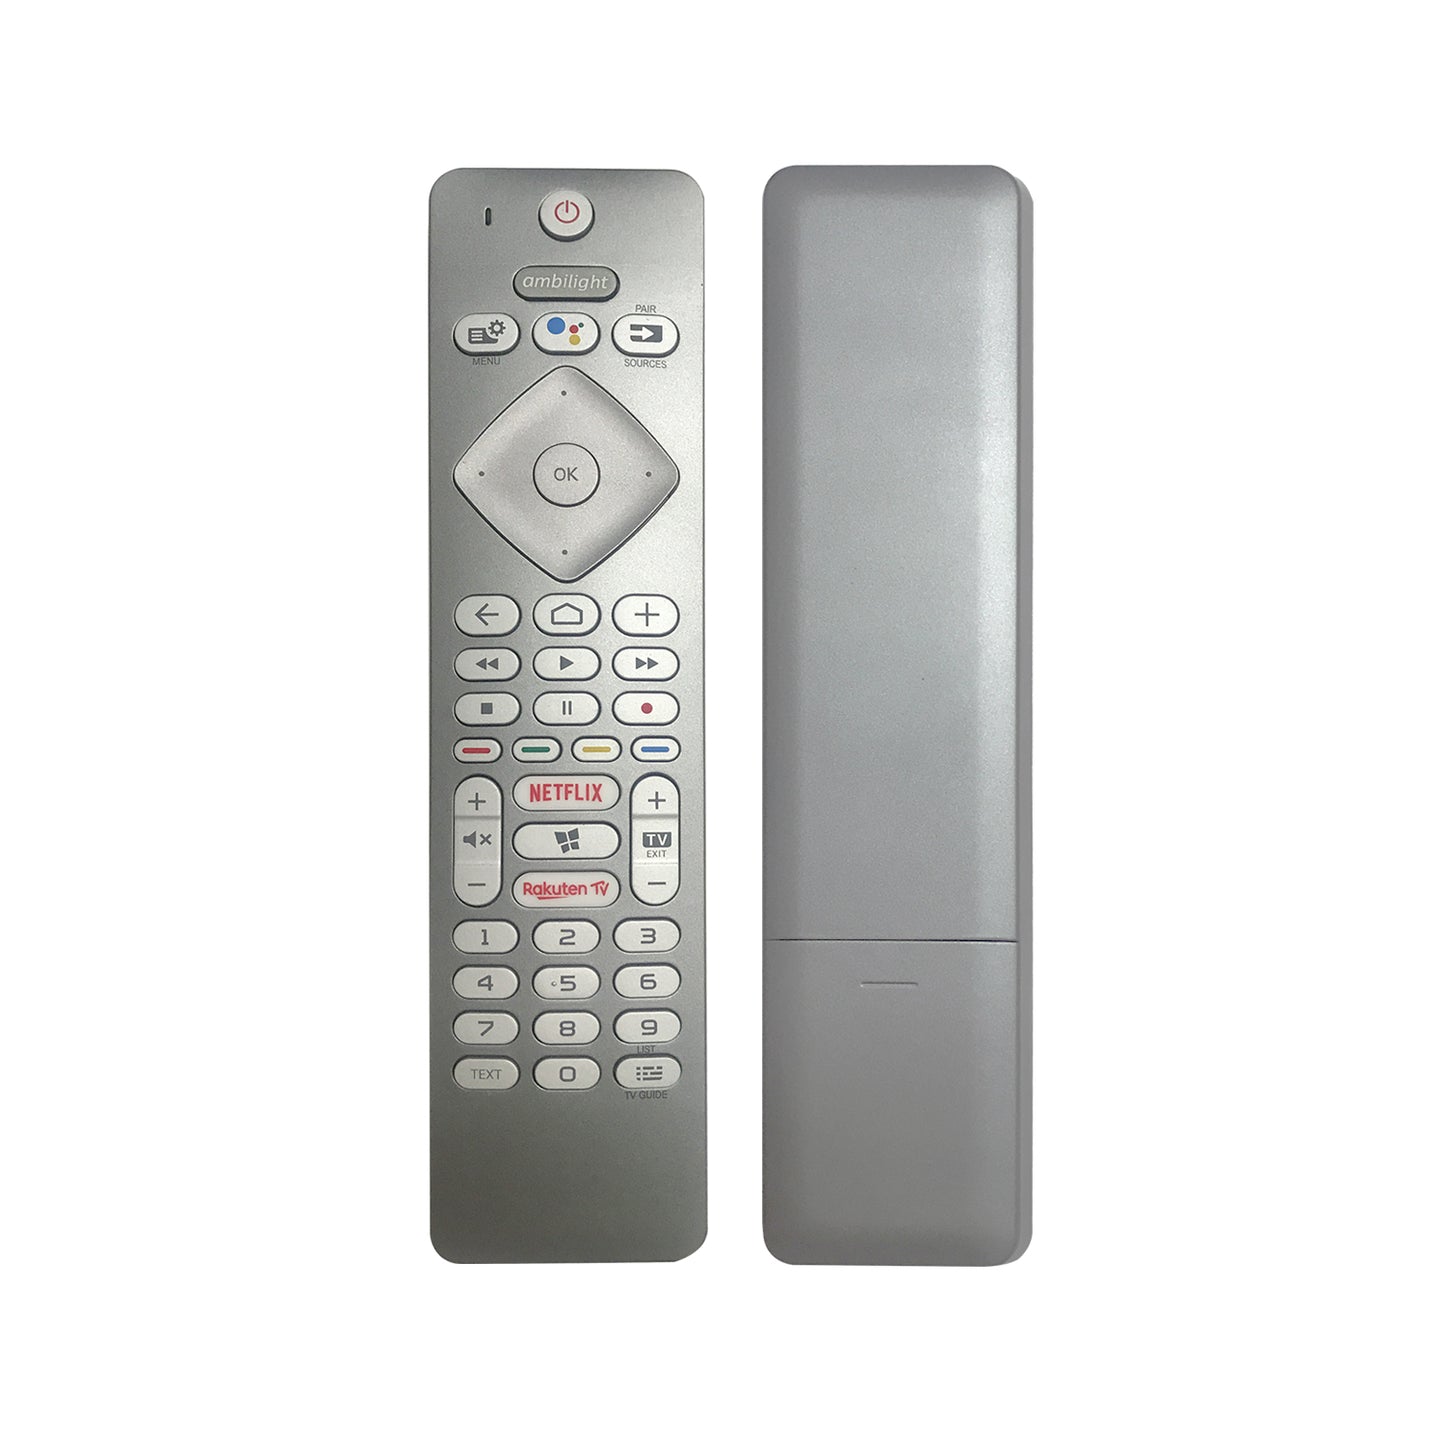 PHV01 Replace RC4154403-01R Voice Remote Control for Philips Smart Tv with Netflix Rakuten TV Function